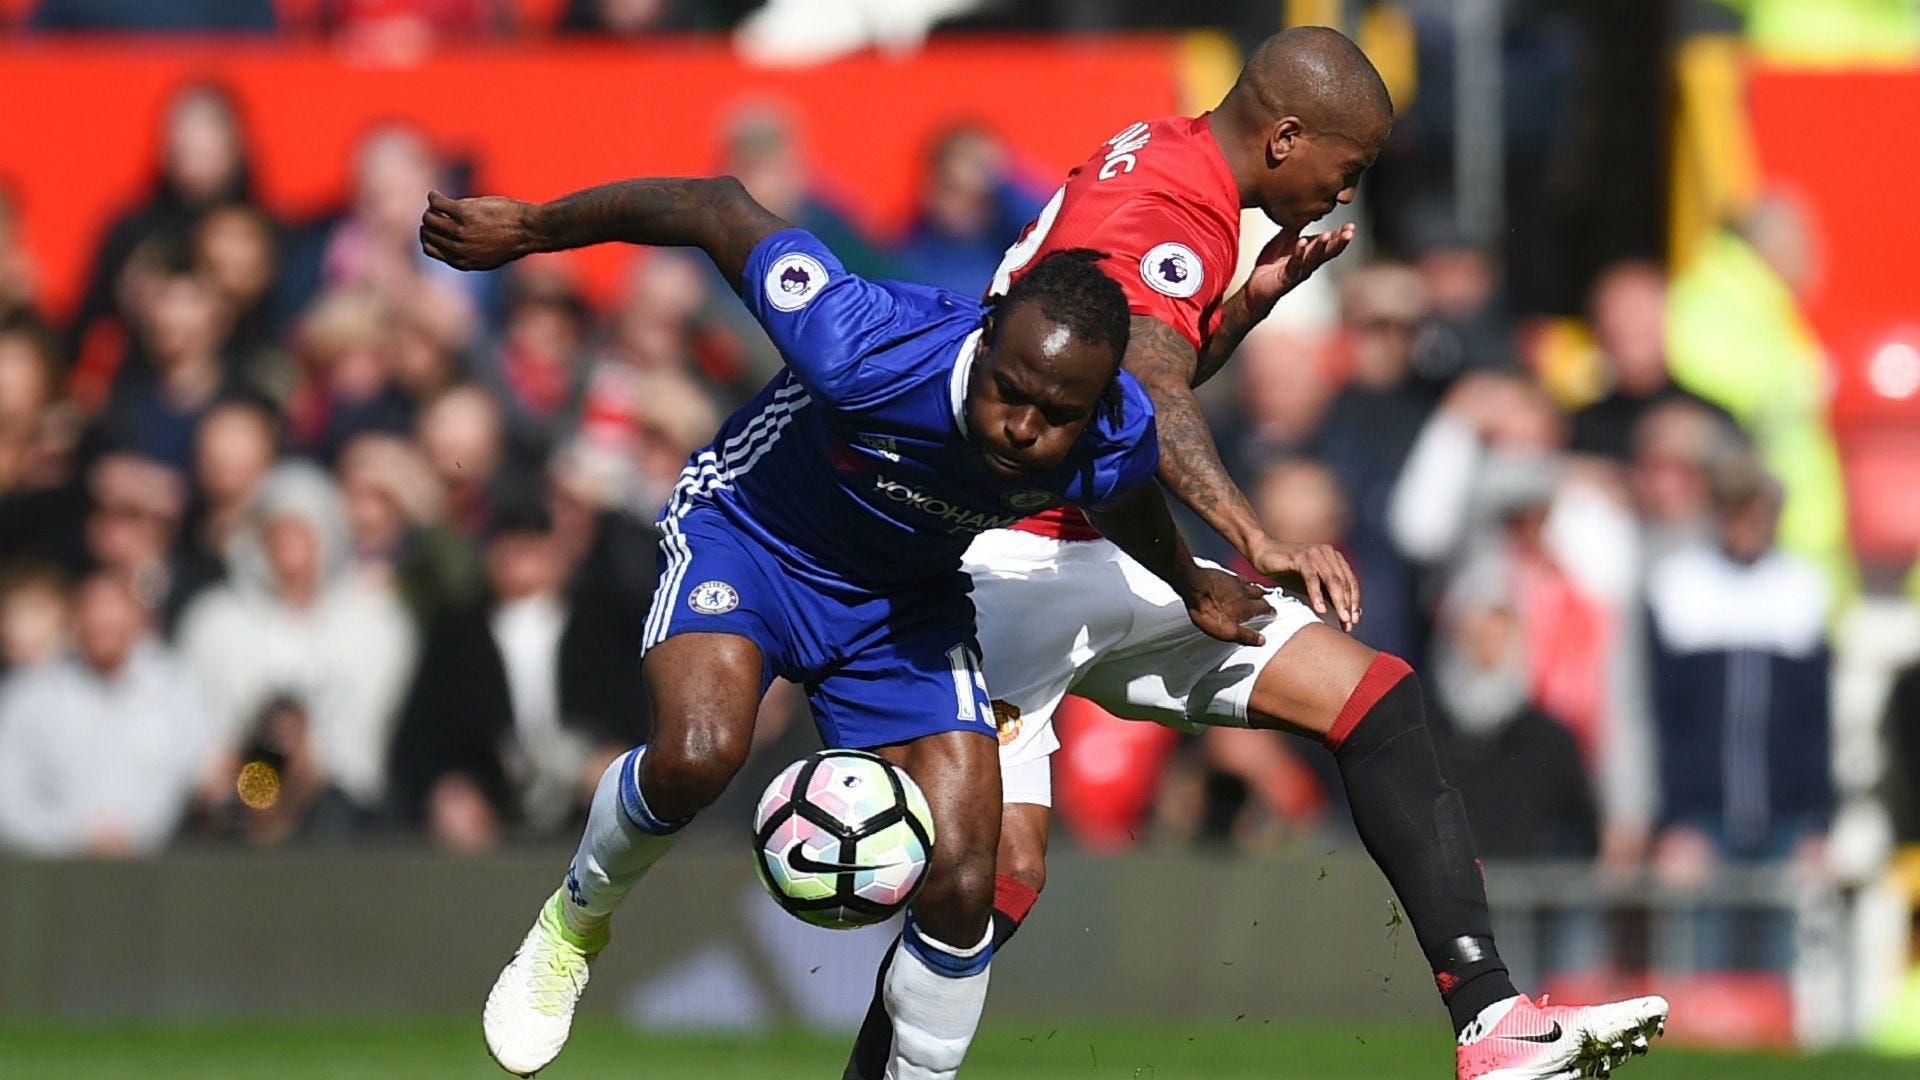 He has found himself under Conte' - Babayaro on Moses' transformation | Goal.com India